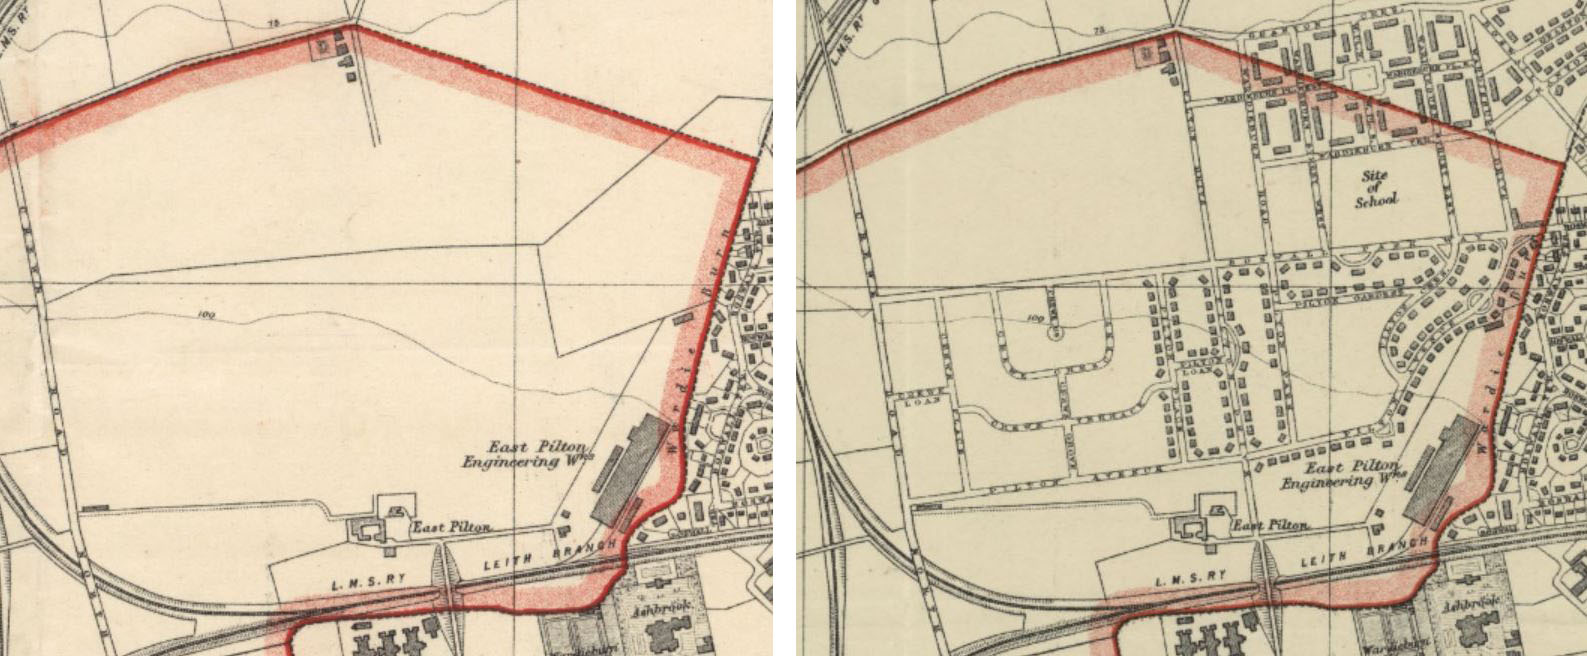 Extracts from Post Office Directory Plans of Edinburgh, 1932-33 on the left and 1934-35 on the right.